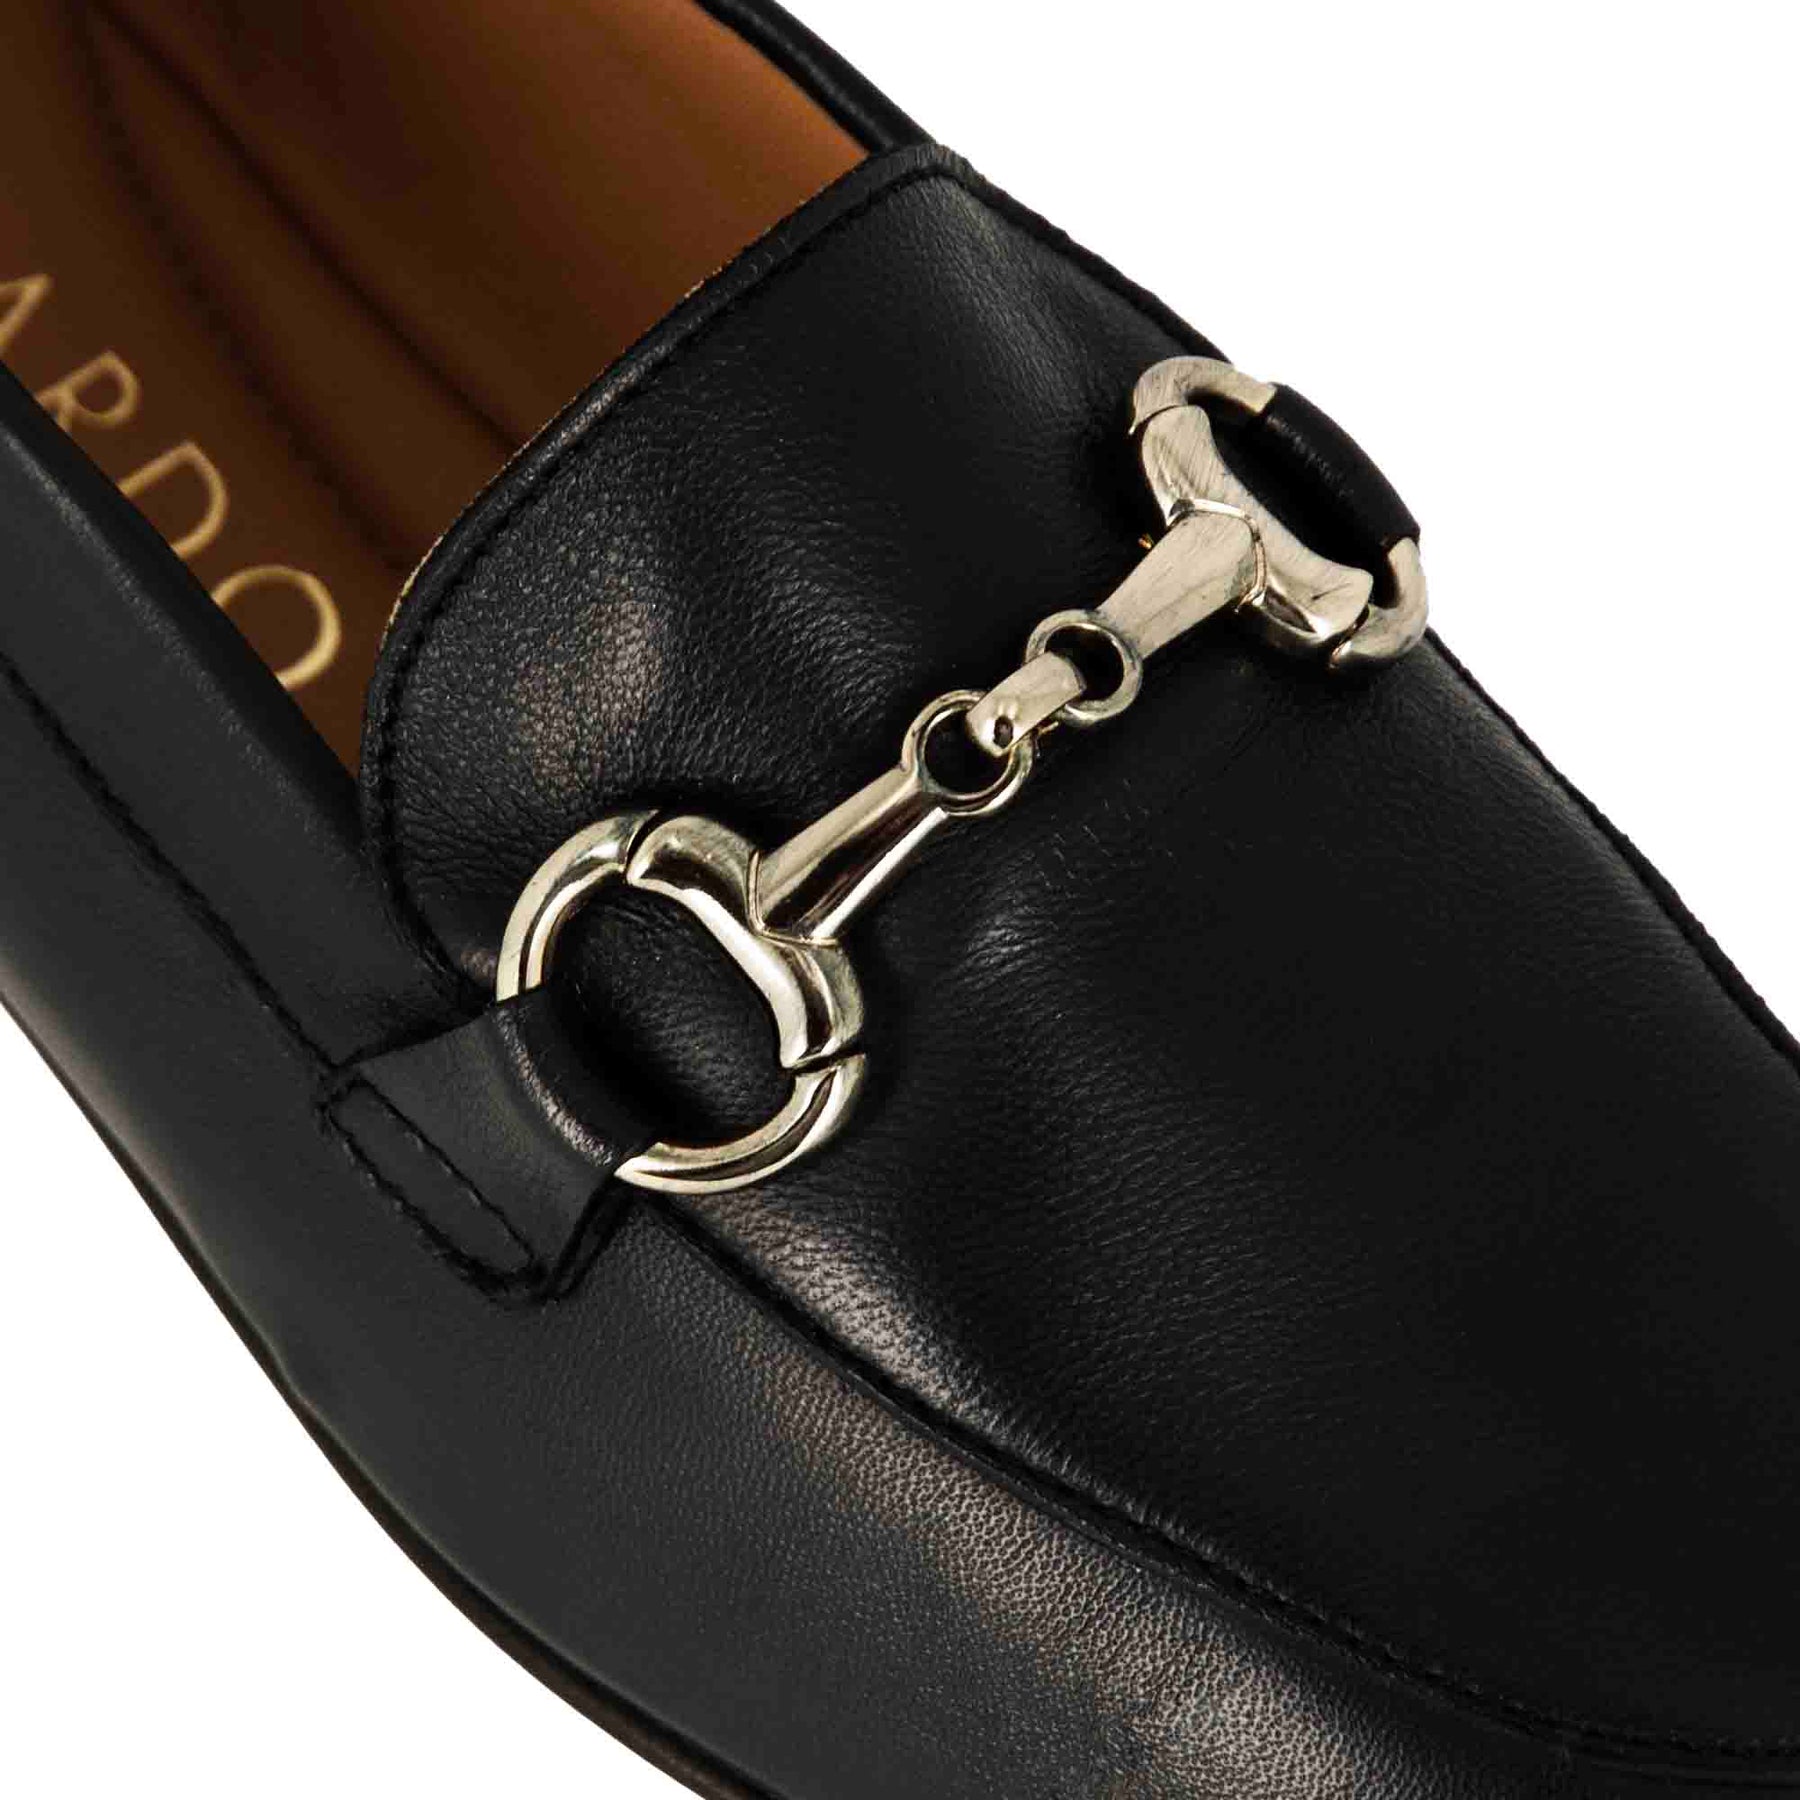 Classic women's moccasin with black leather clamp